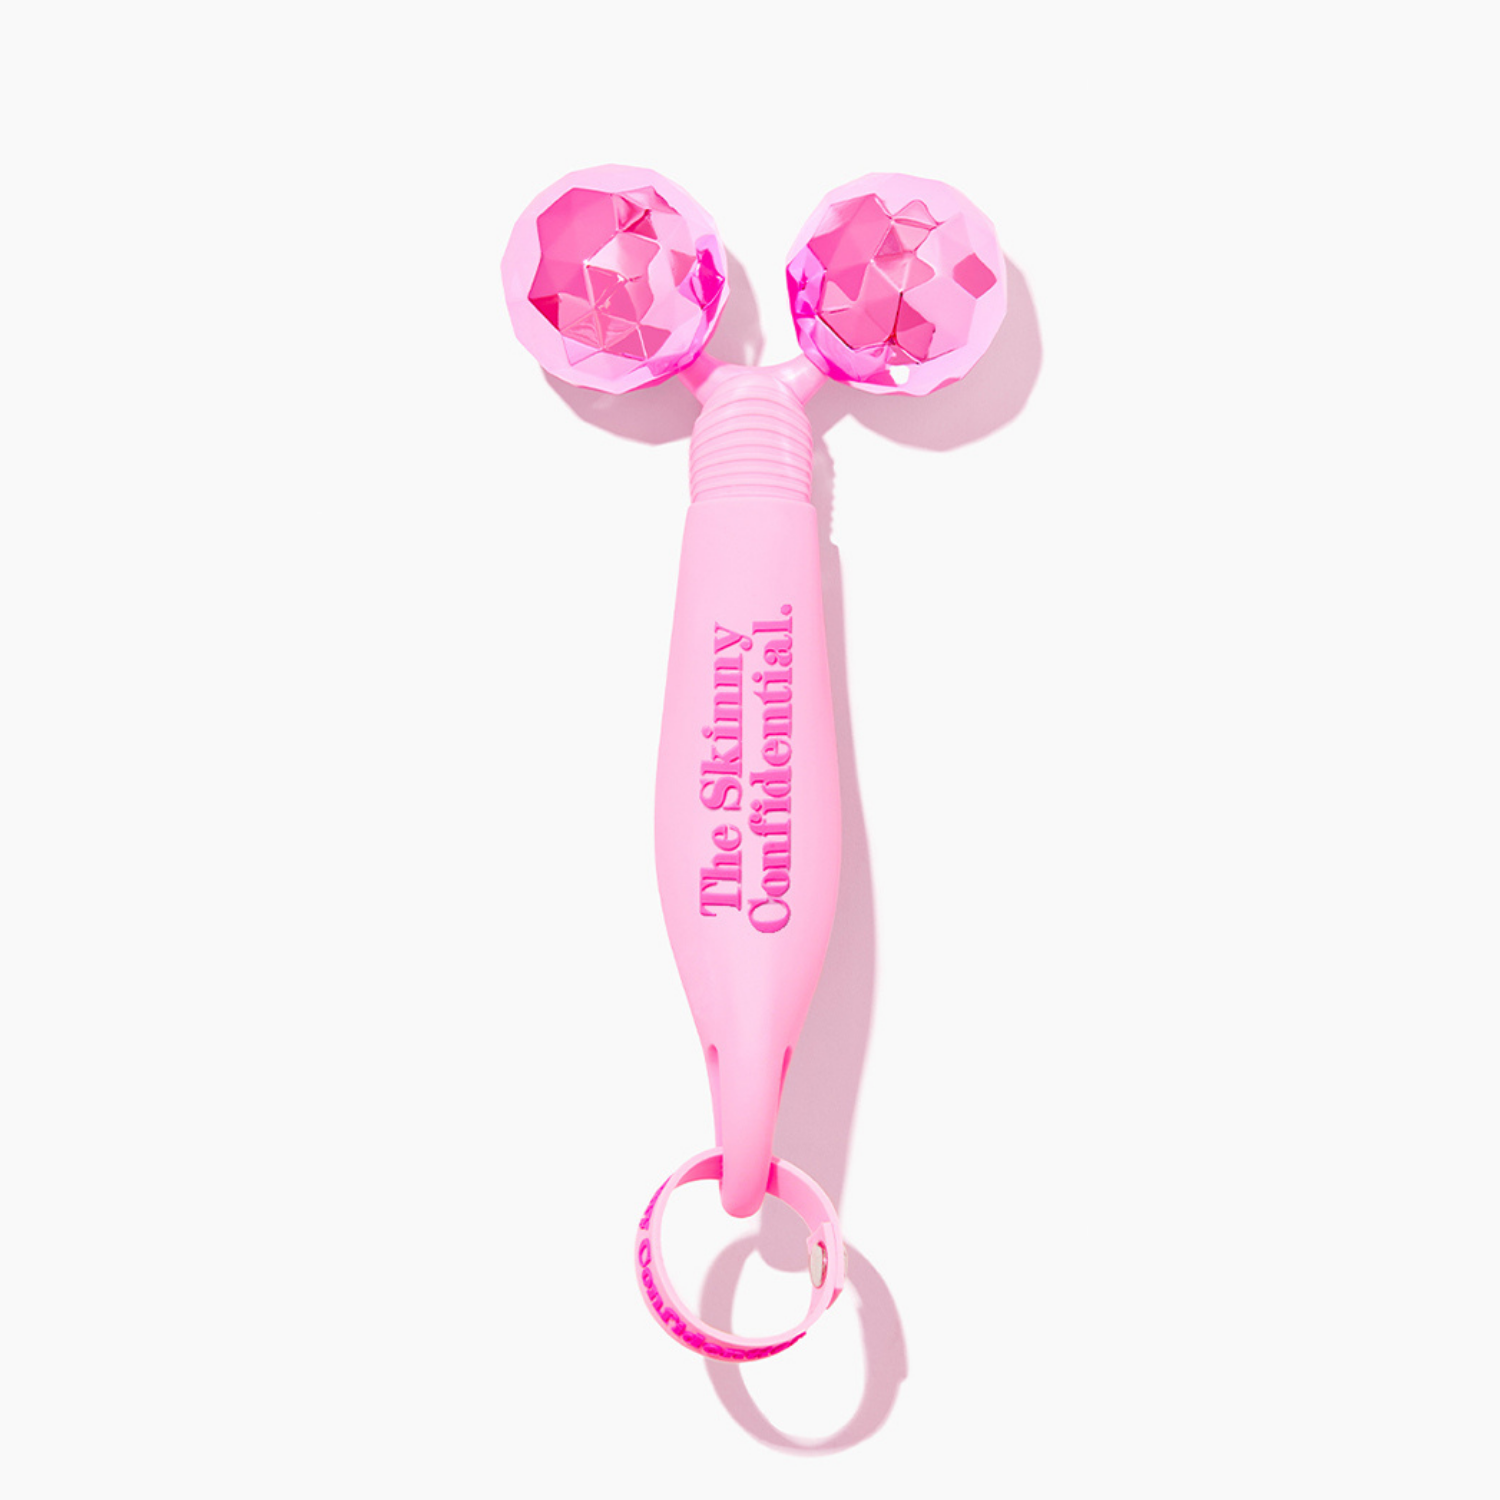 The Skinny Confidential Pink Balls Facial Massager Shop at Exclusive Beauty